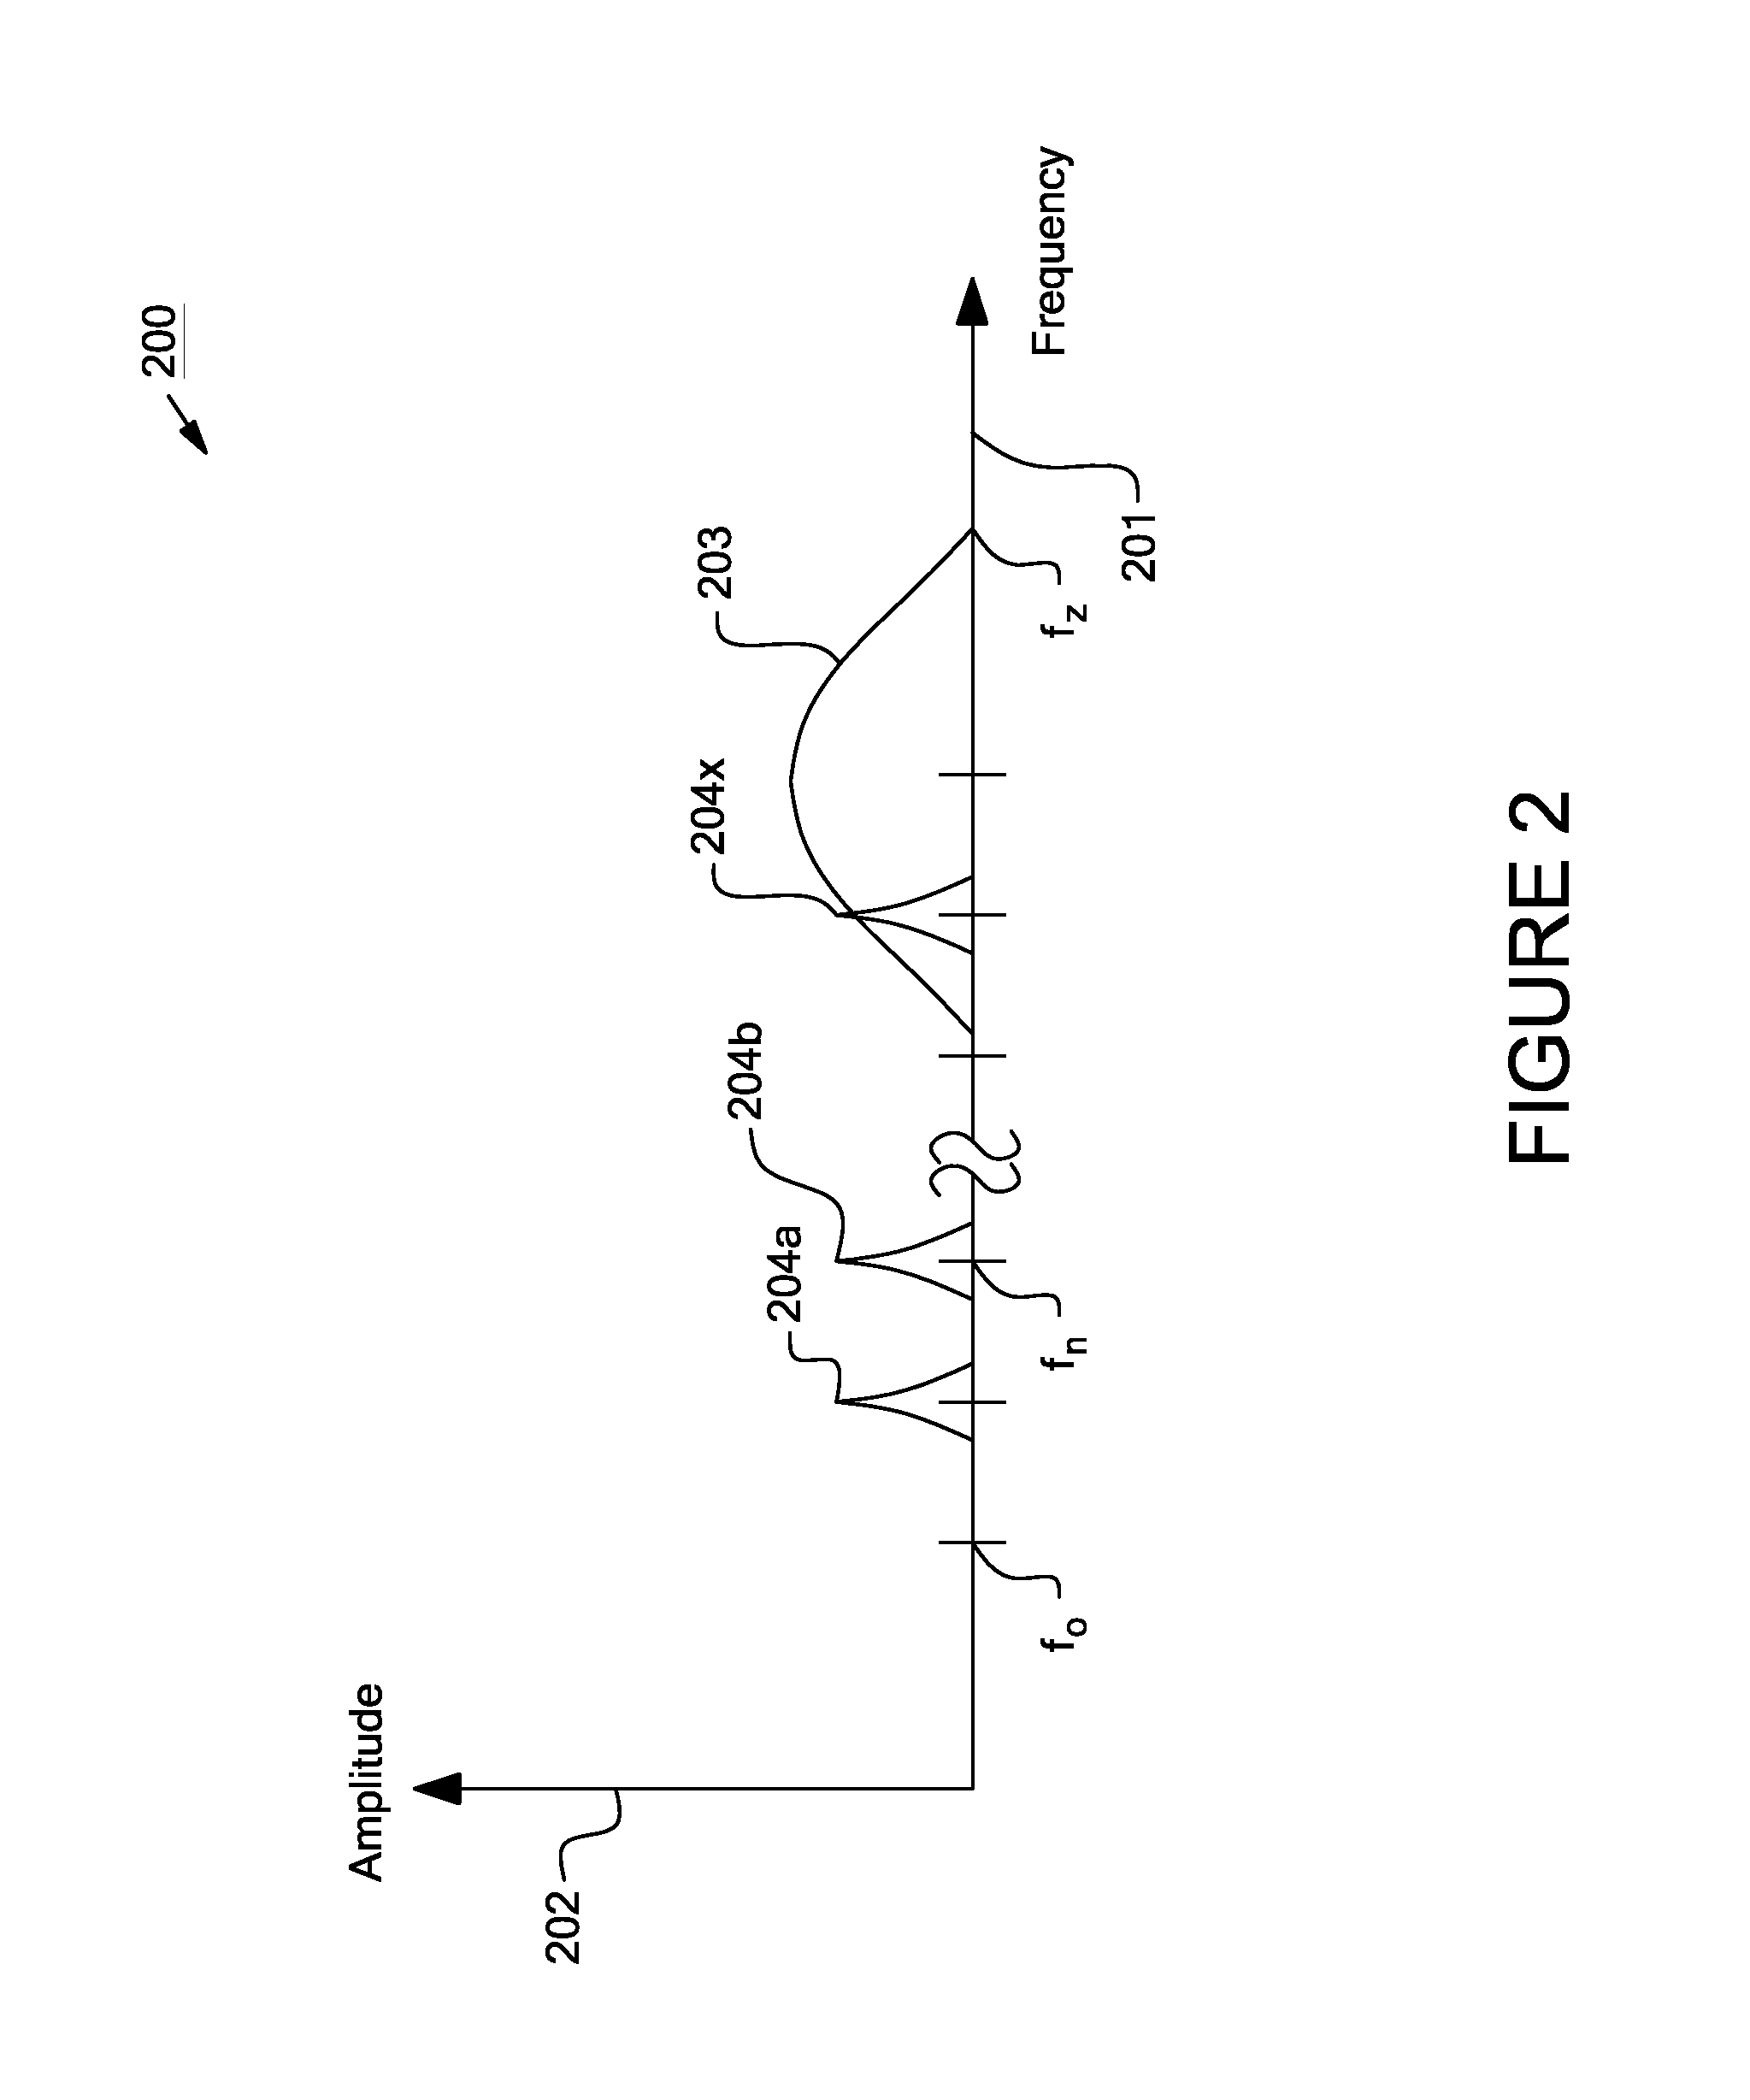 Systems and methods for a communication protocol between a local controller and a master controller